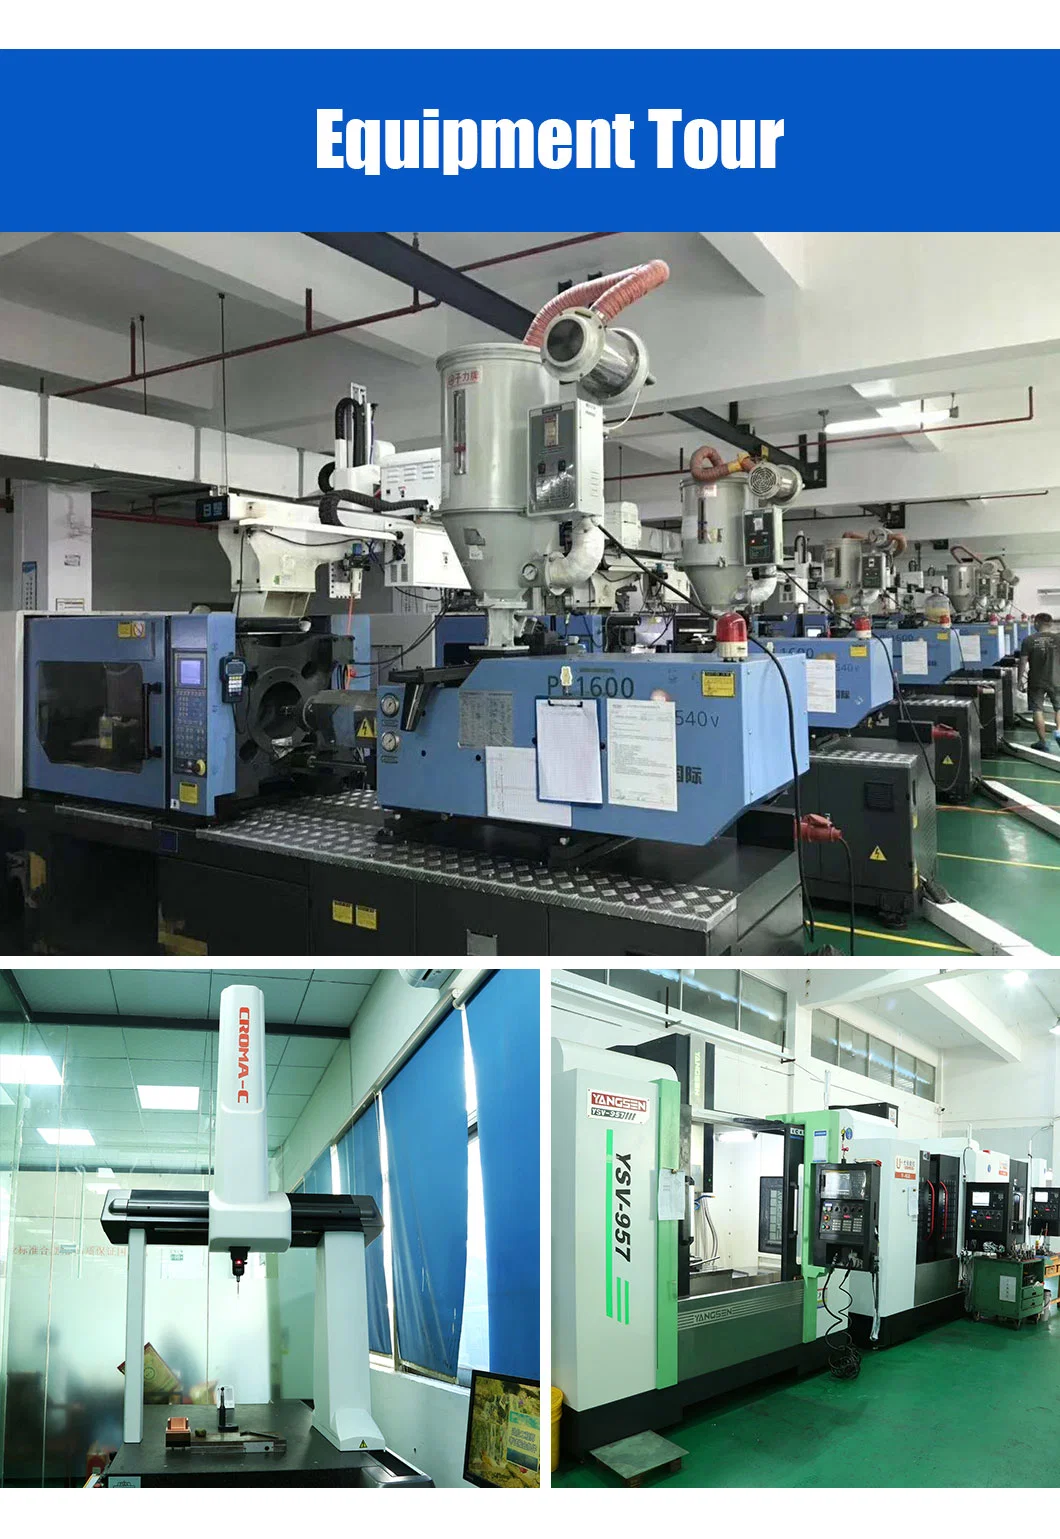 High Quality PP ABS V0 PVC Thick Wall Gas Assisted Rapid Injection Moulding Industrial Molds Tooling and Plastic Molding Manufacturer Companies